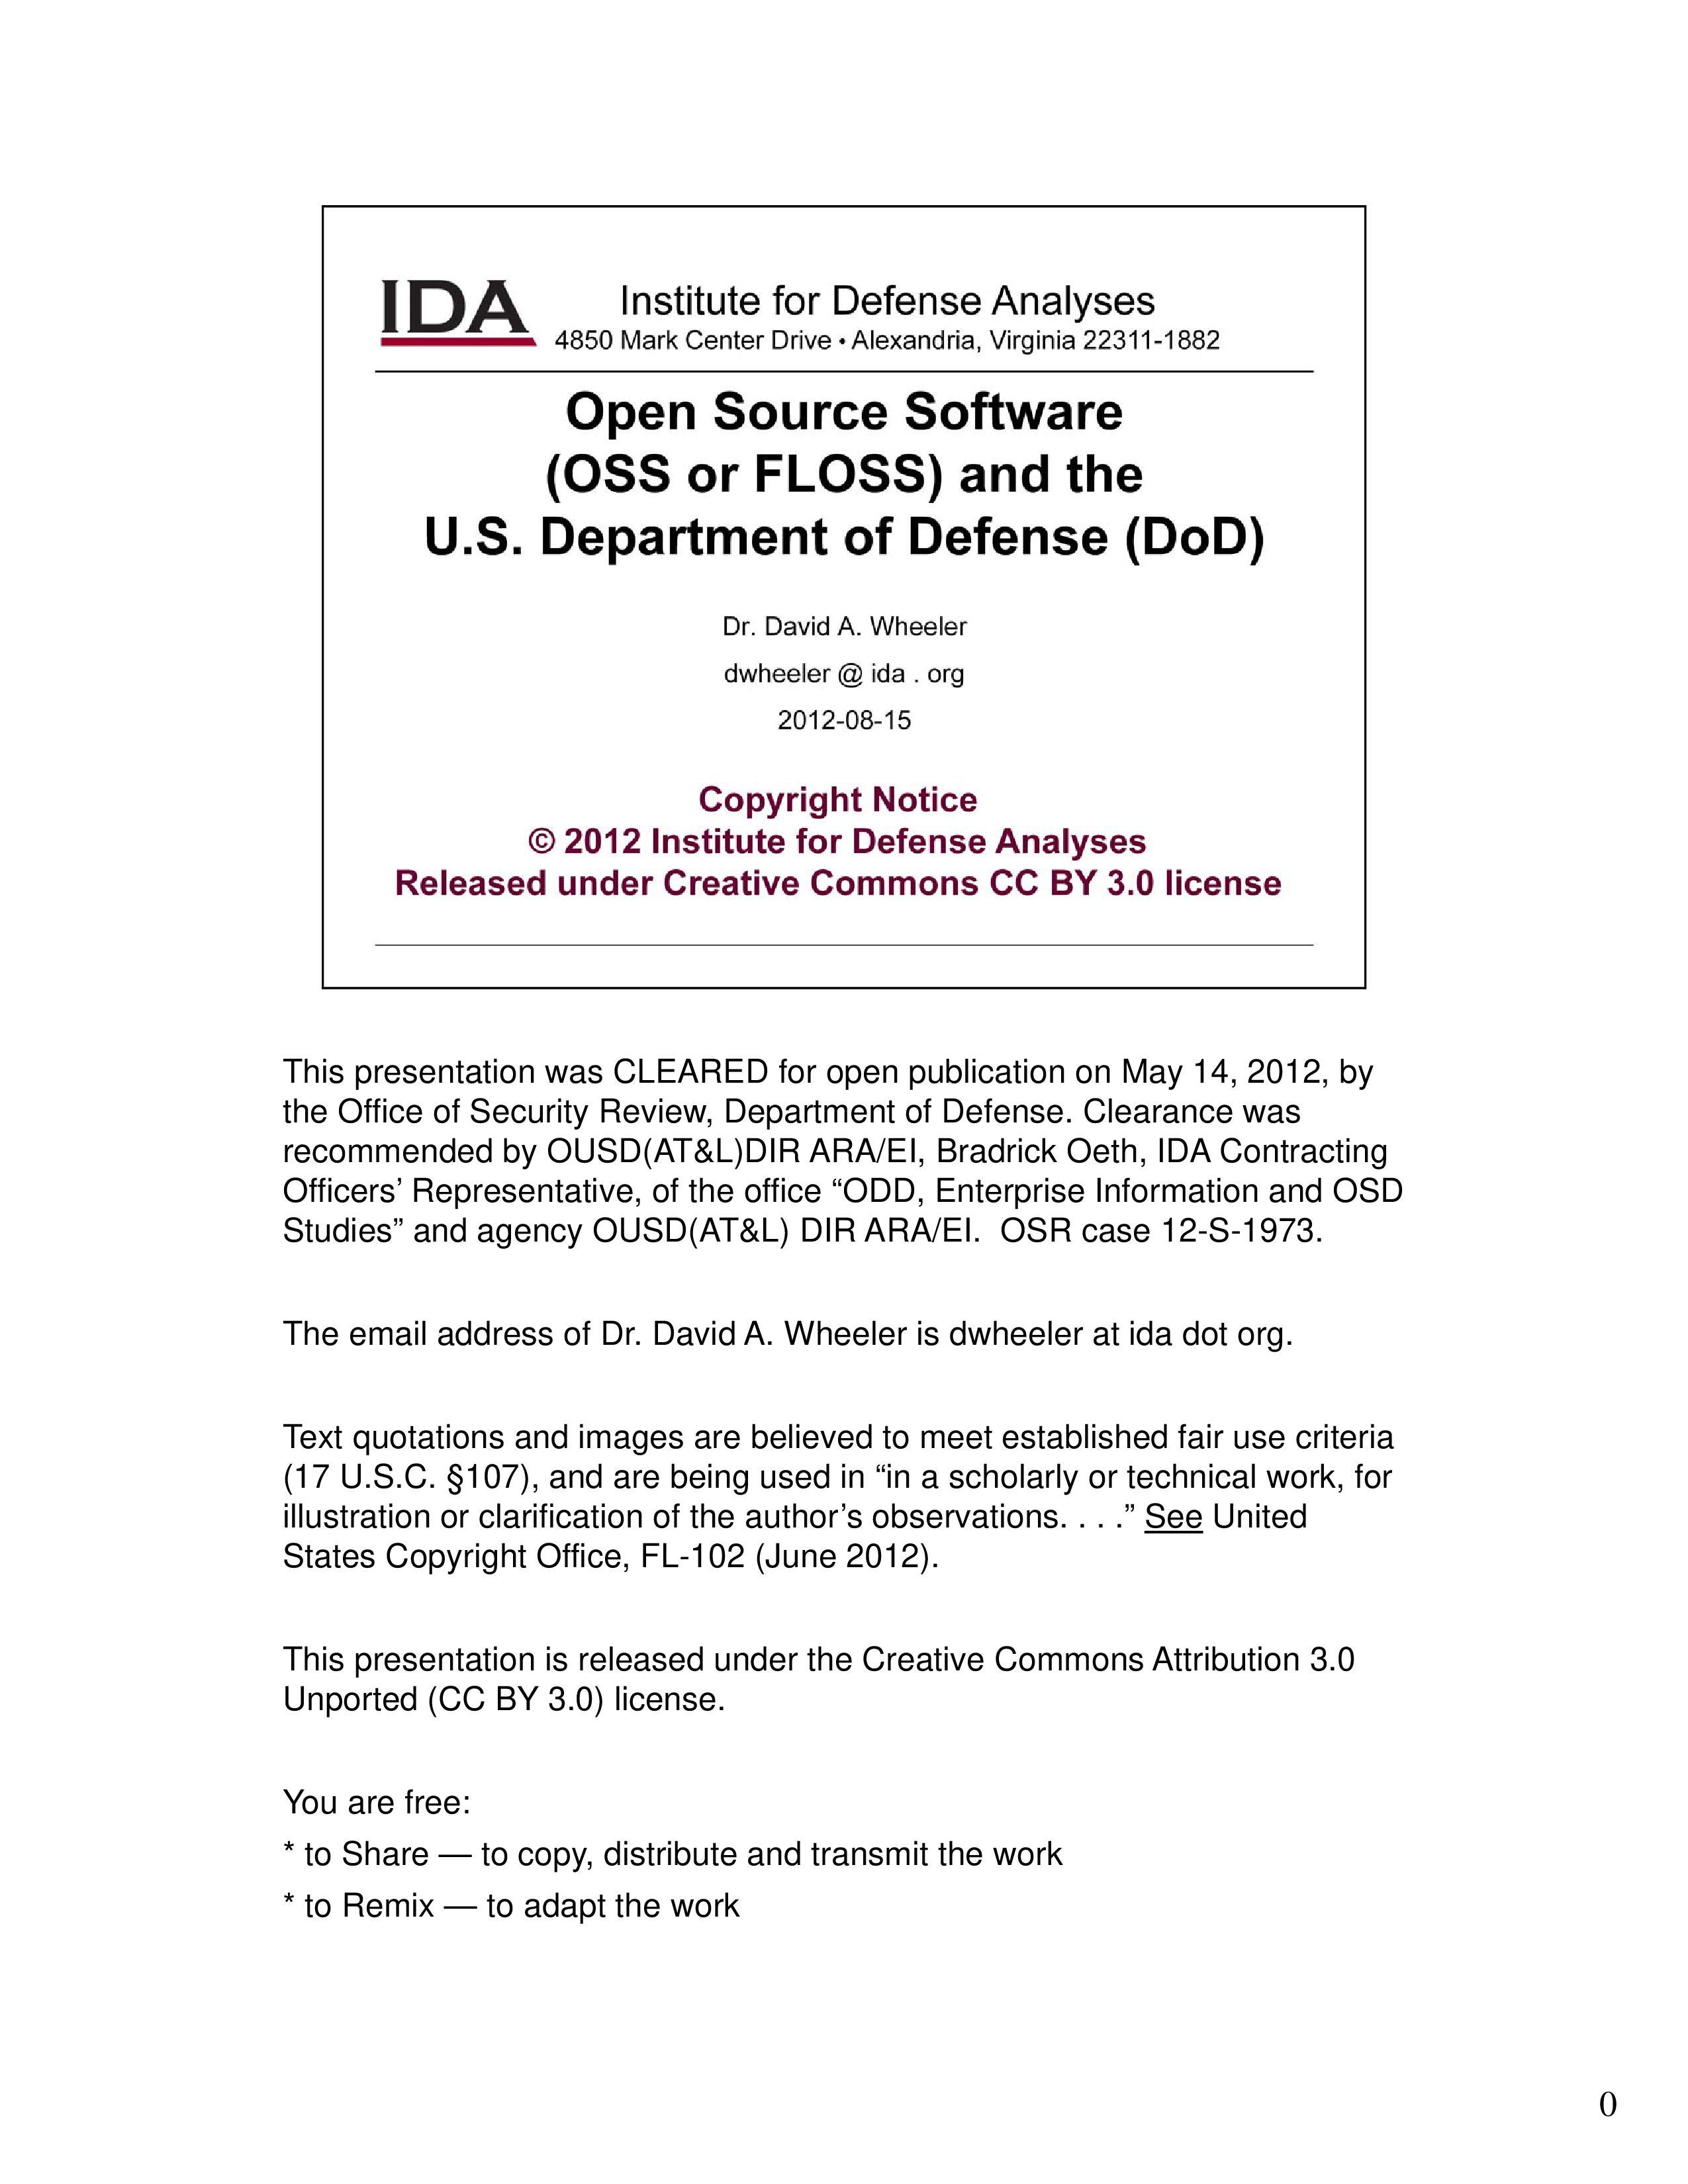 Open Source Software (OSS or FLOSS) and the U.S. Department of Defense (DoD)